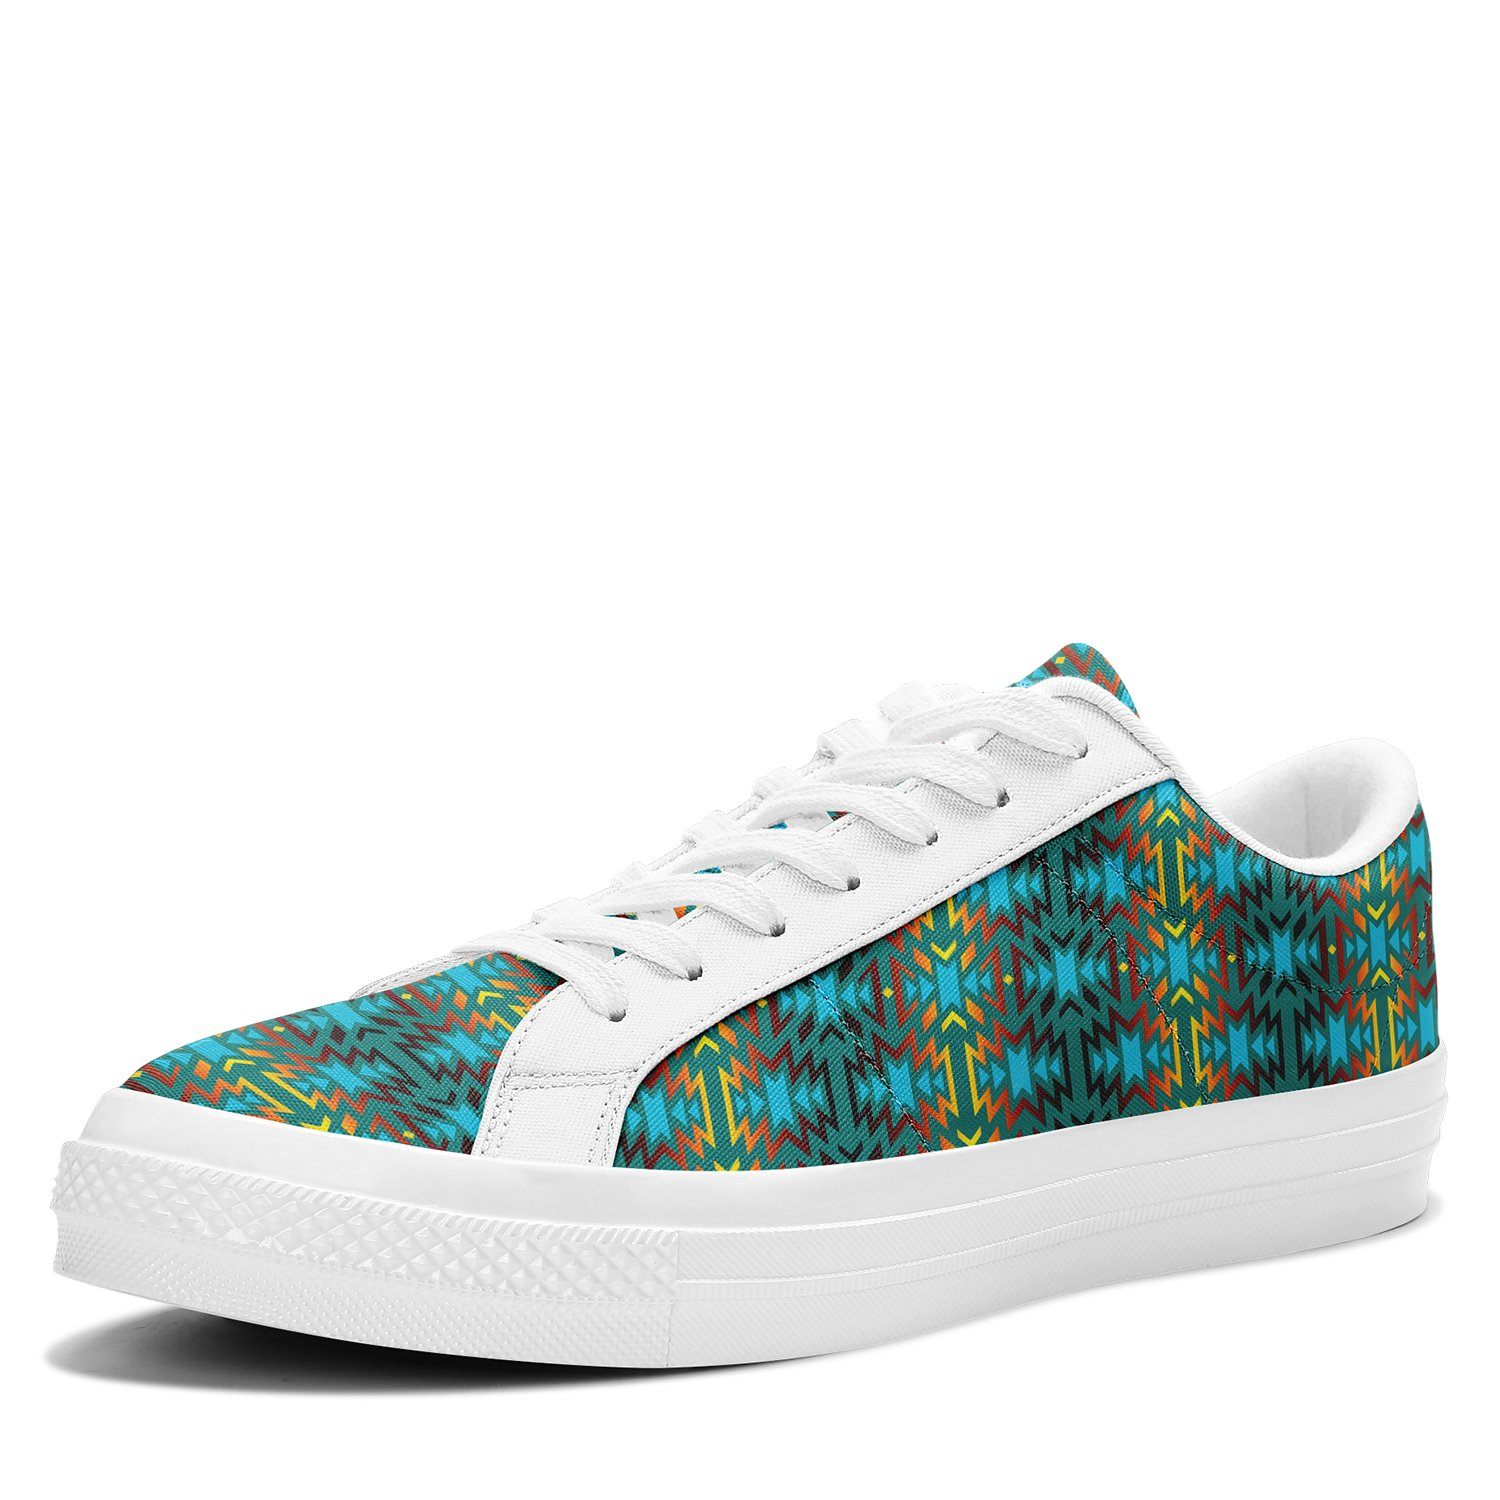 Fire Colors and Turquoise Teal Aapisi Low Top Canvas Shoes White Sole 49 Dzine 